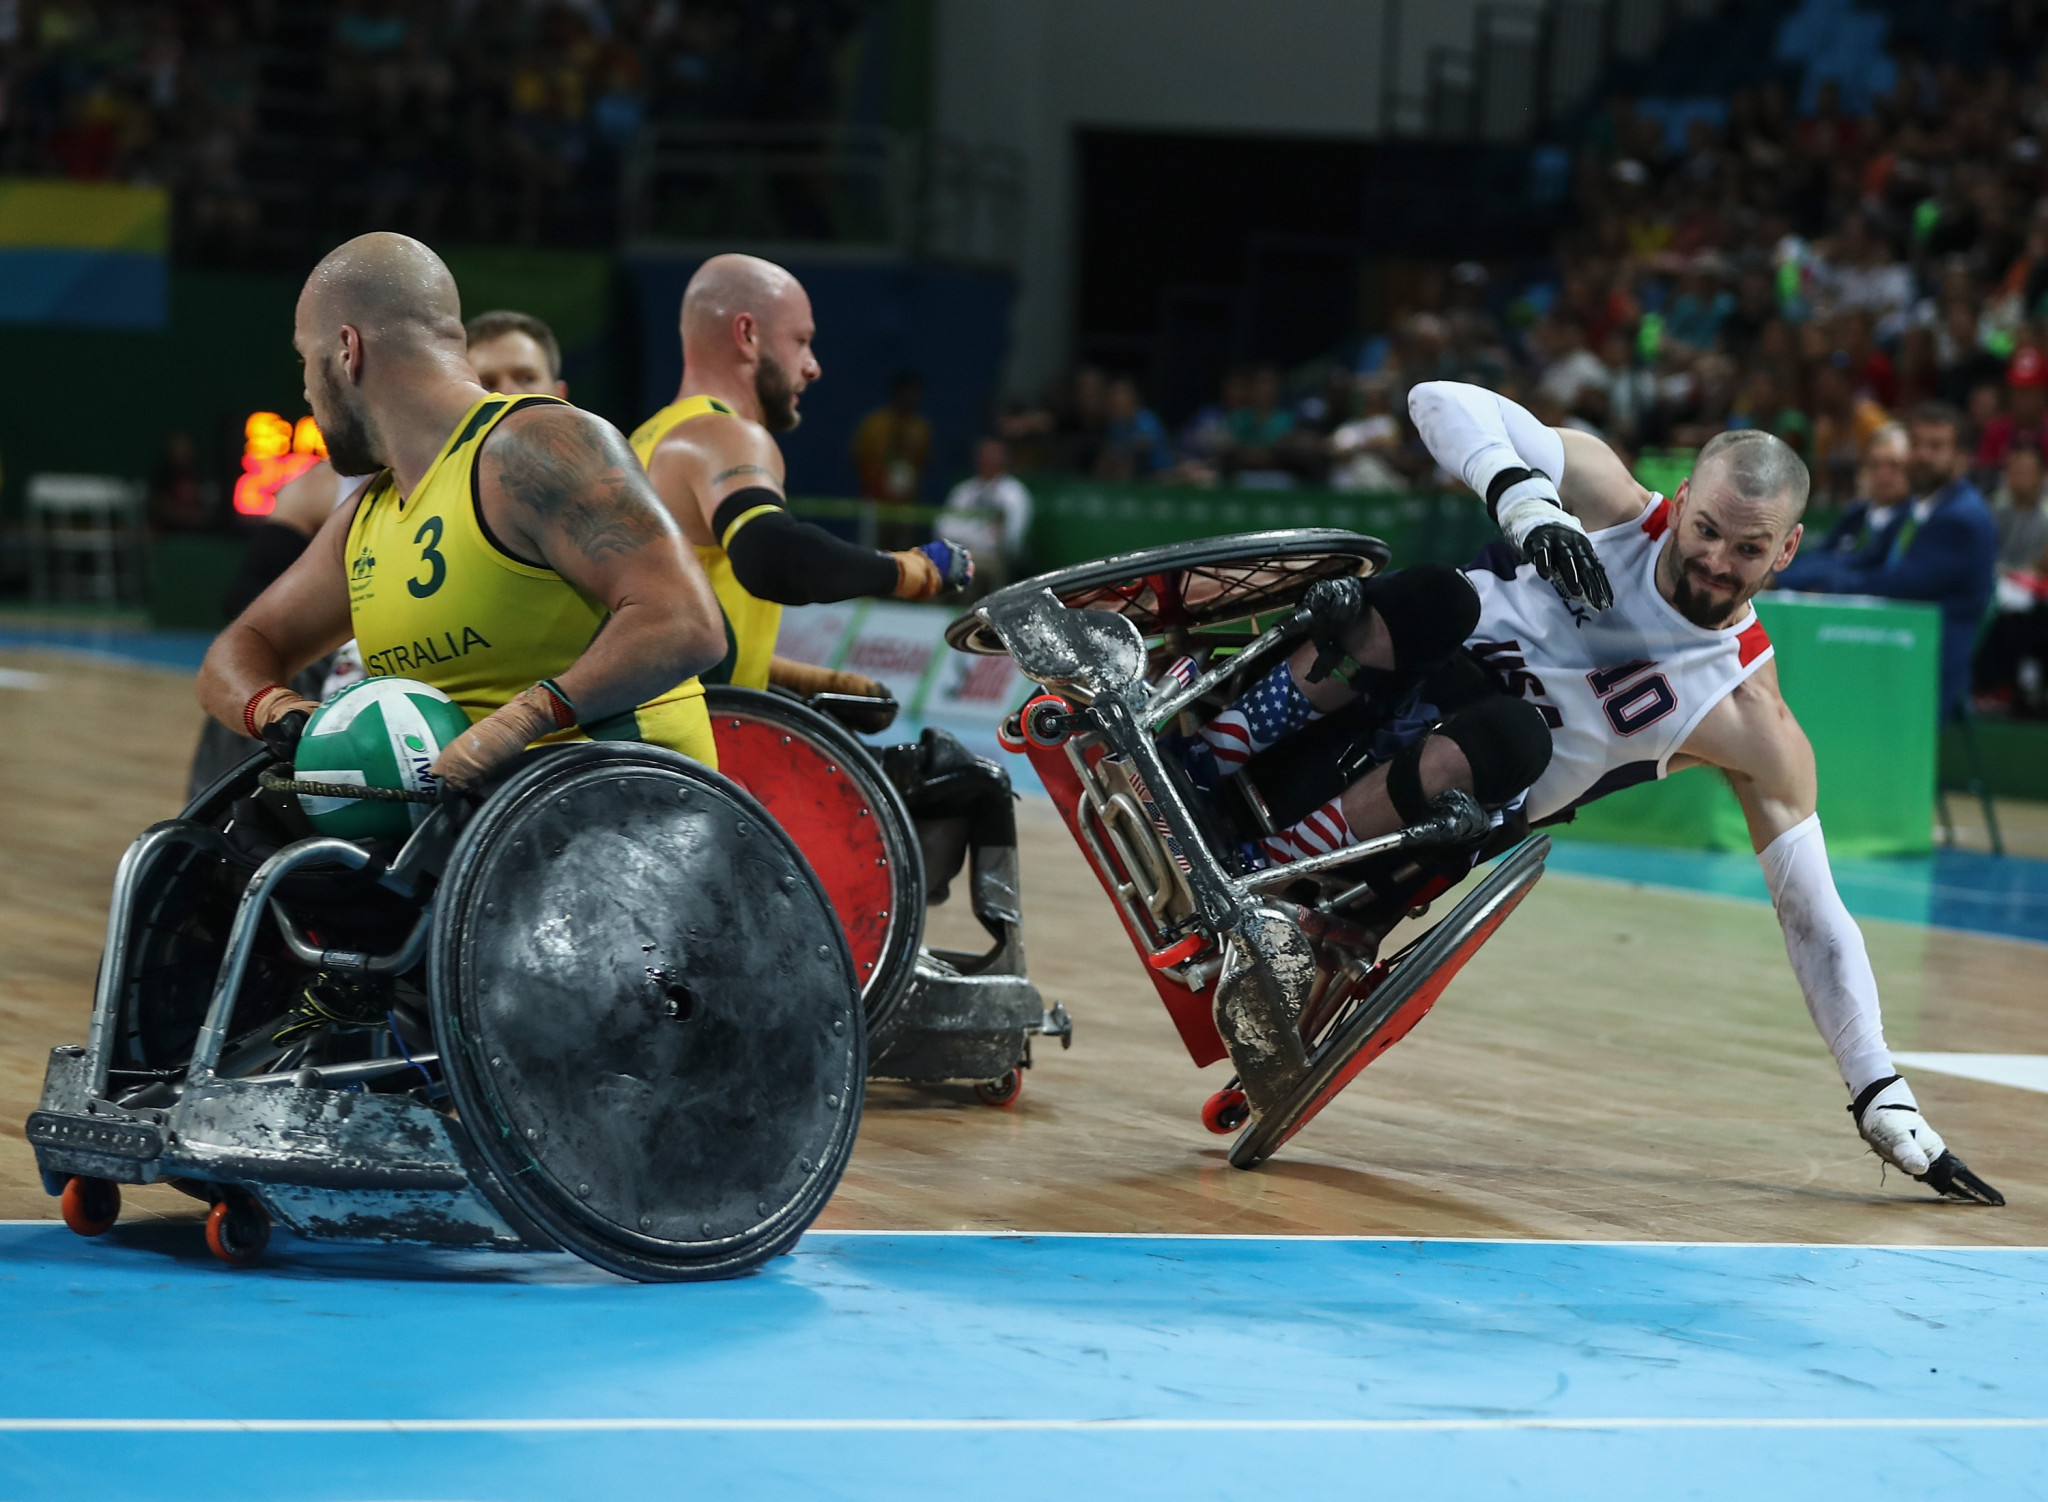 International Wheelchair Rugby Federation restructure website for easier use